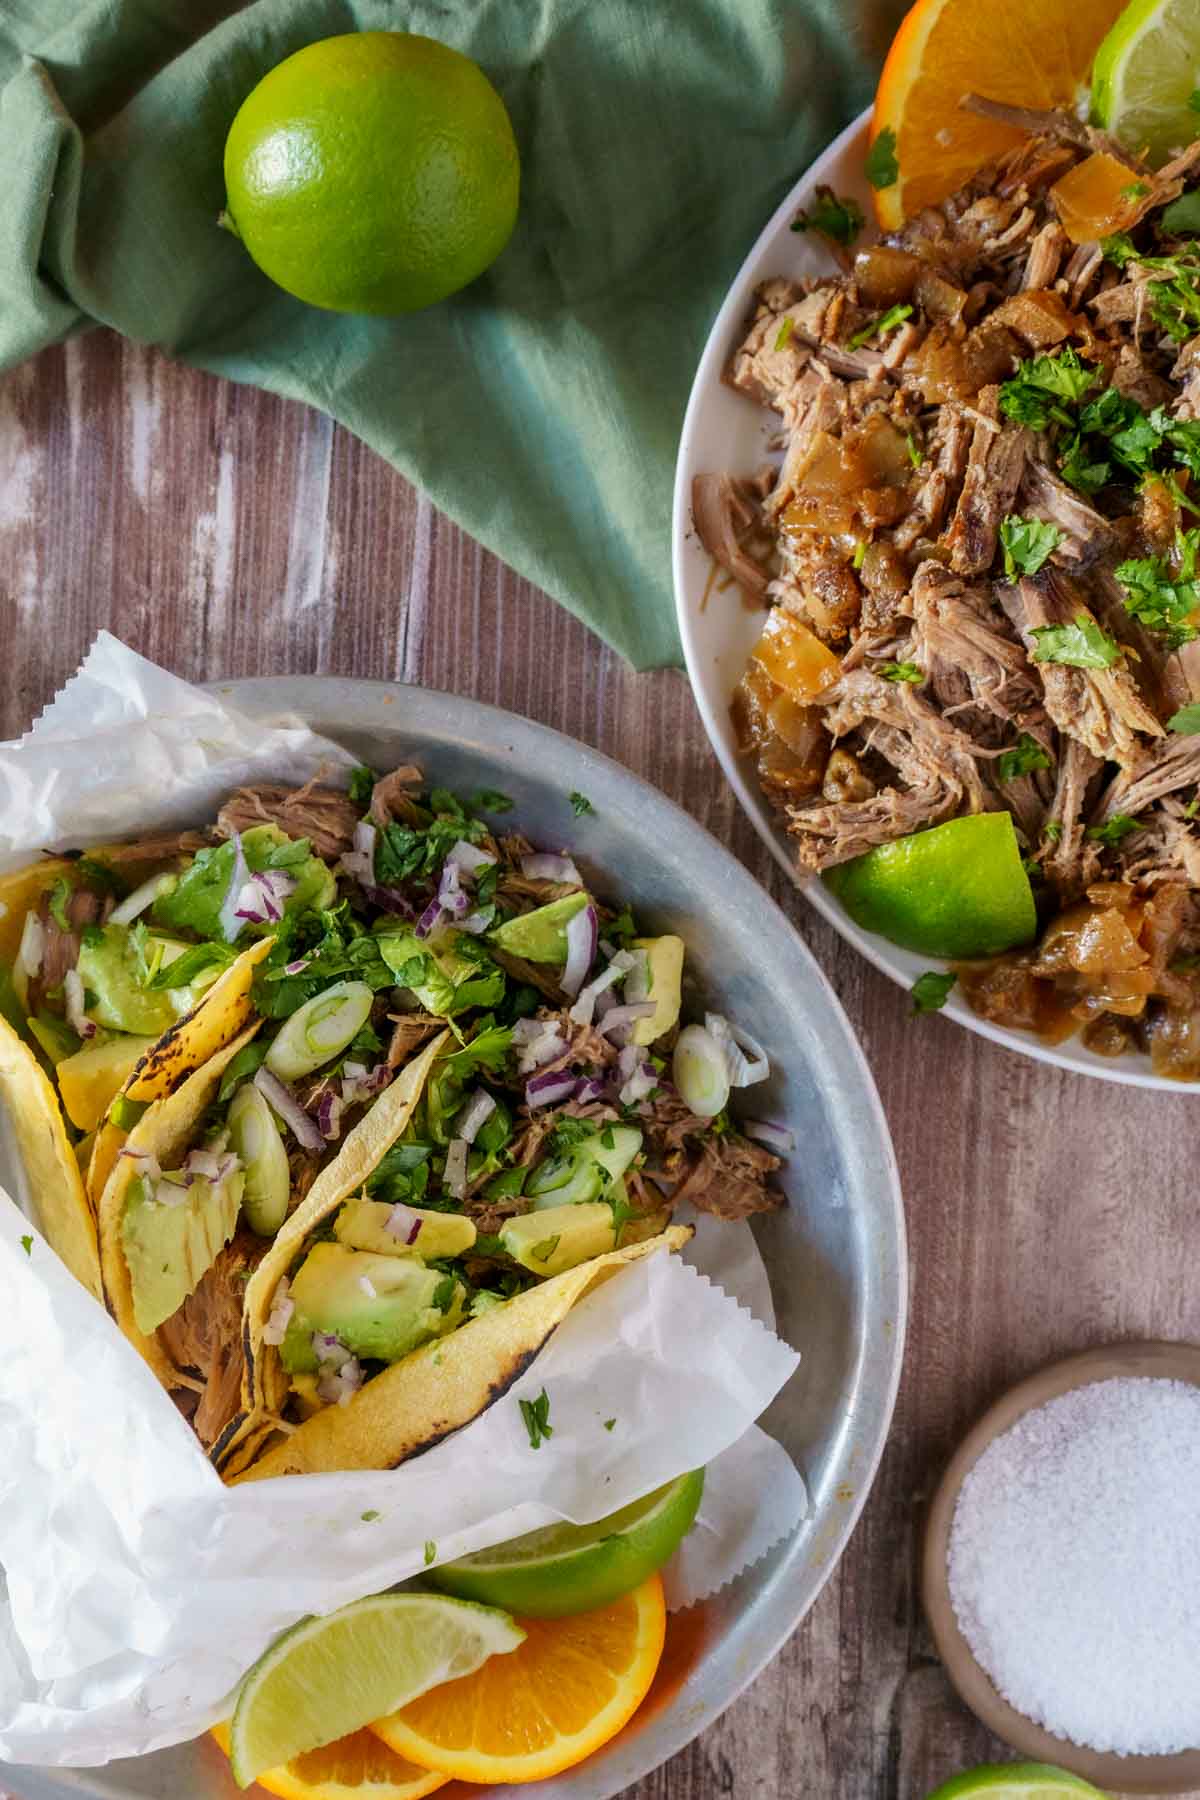 Shredded beef tacos in corn tortillas with avocado and green onions.